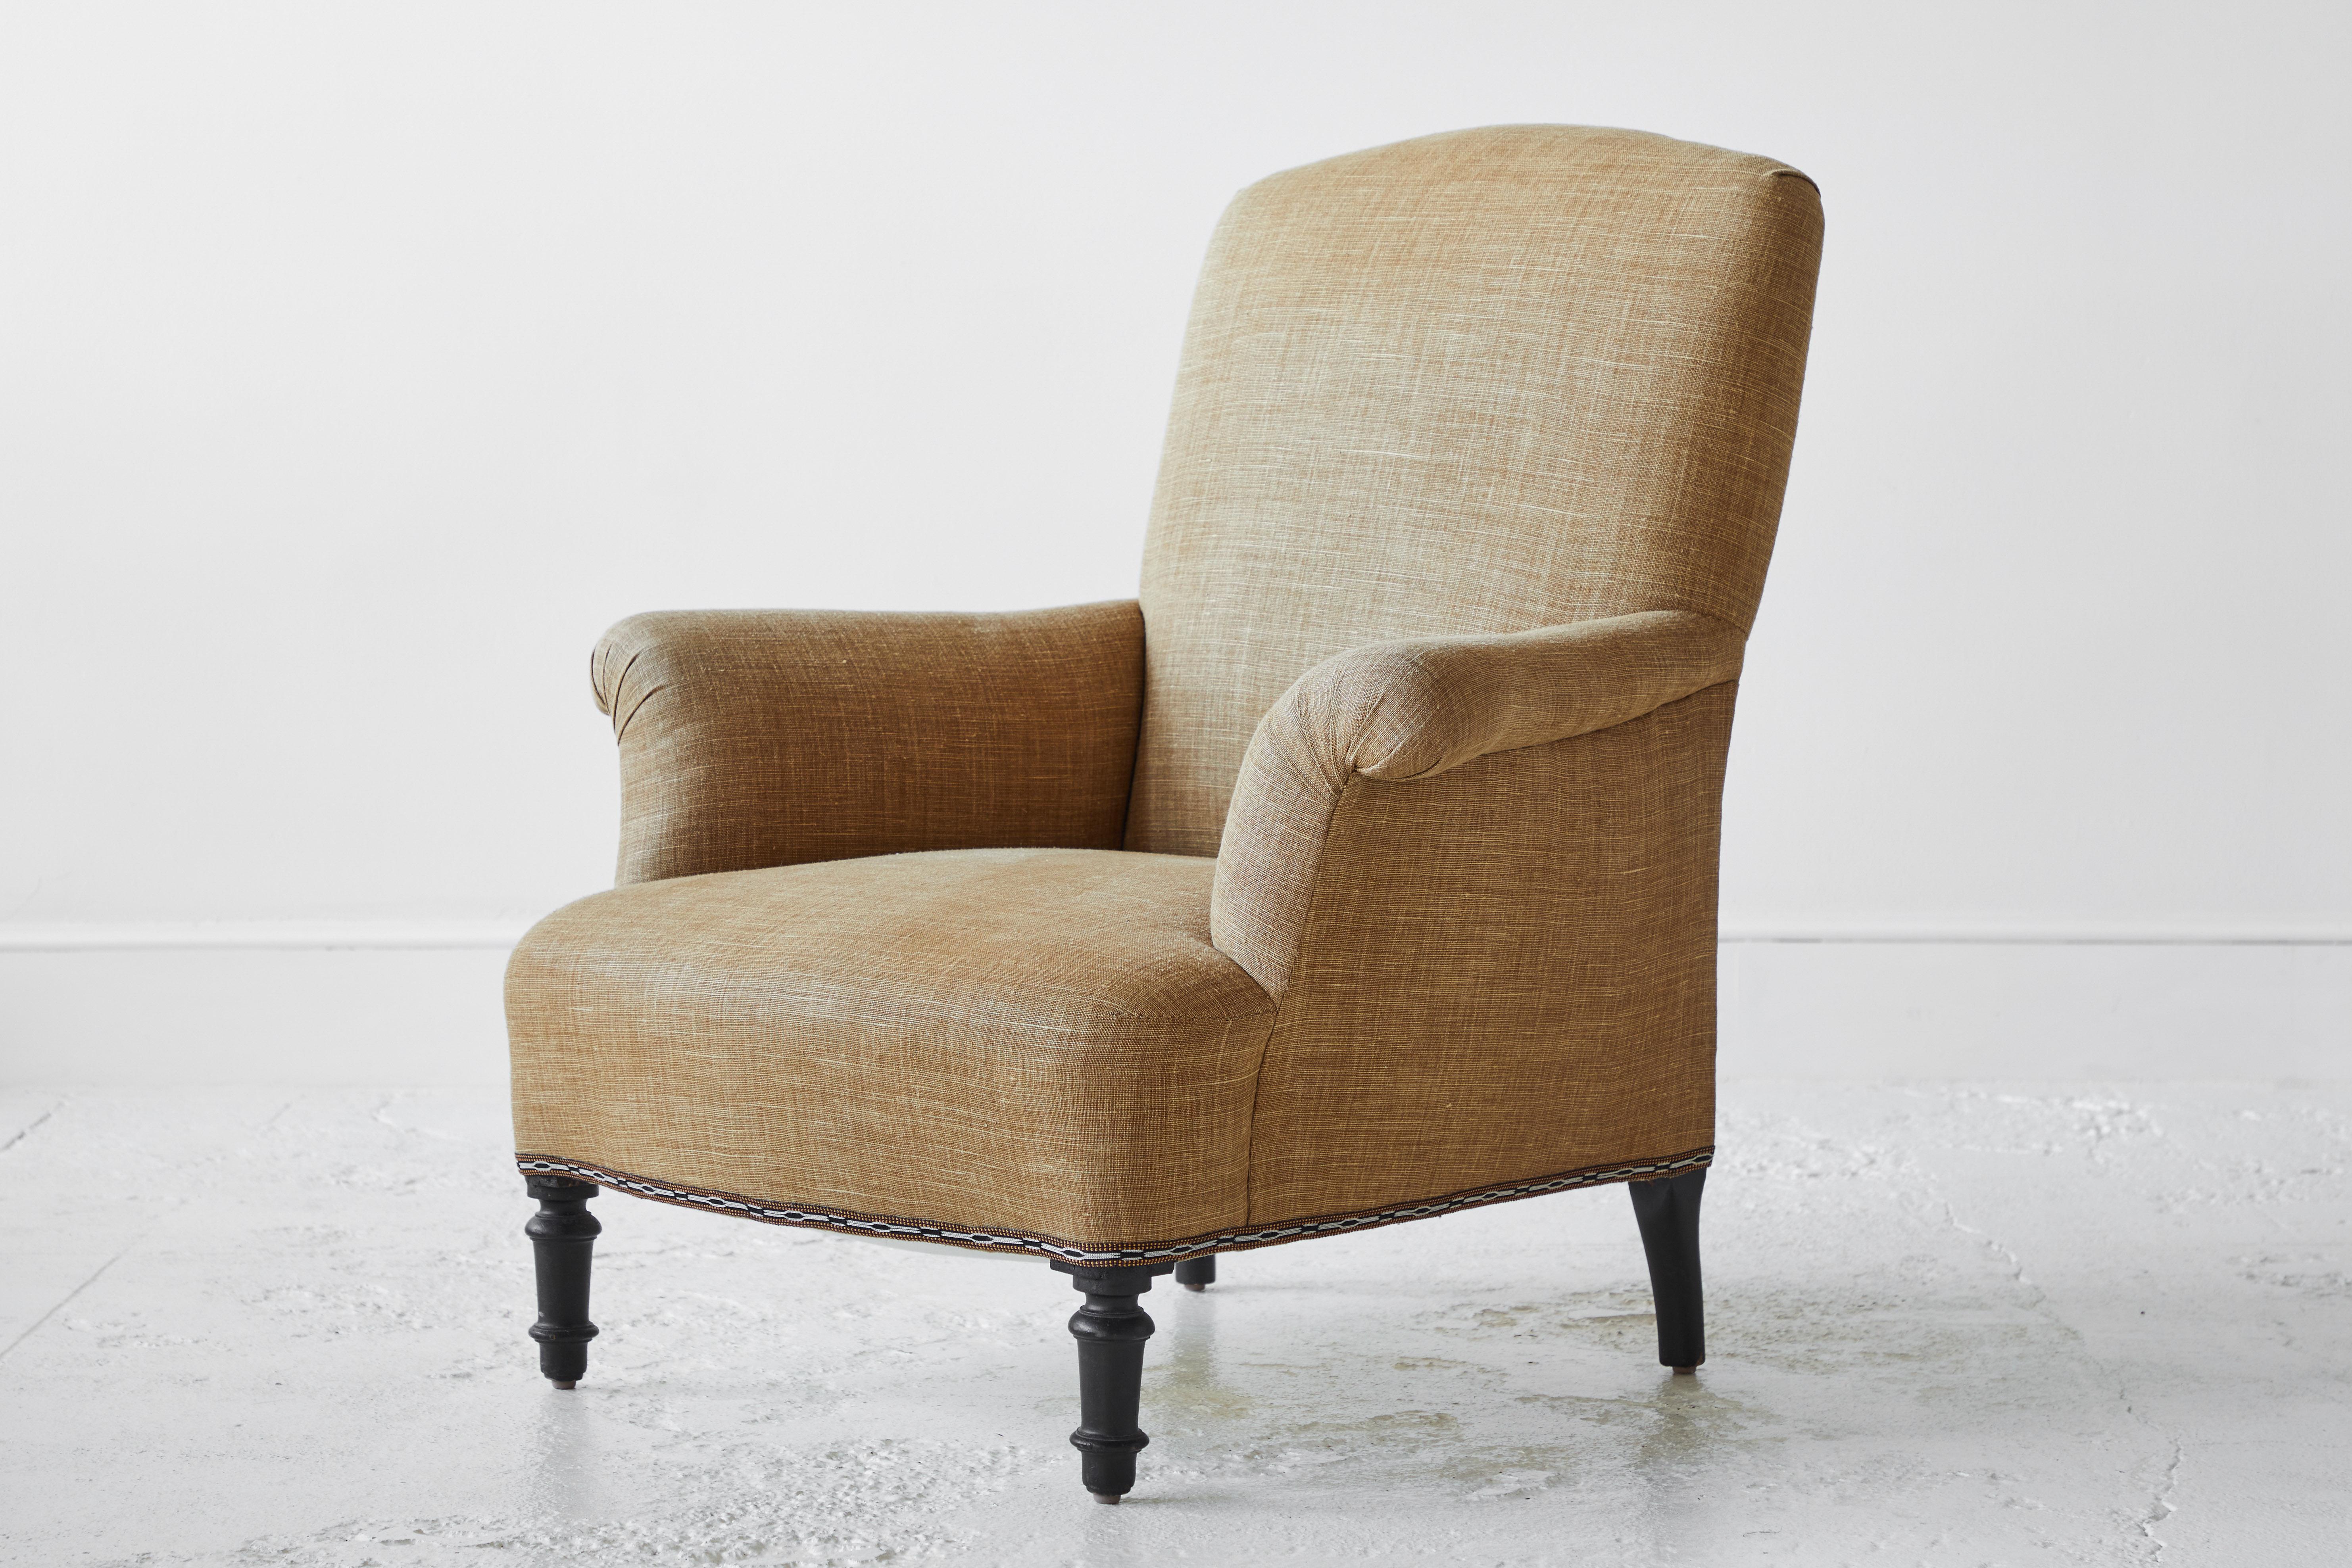 French Club Chair upholstered in a mustard colored Linen, the chair has a sweet vintage trim by Susan Deliss. The legs are original and the finish has not been altered. 